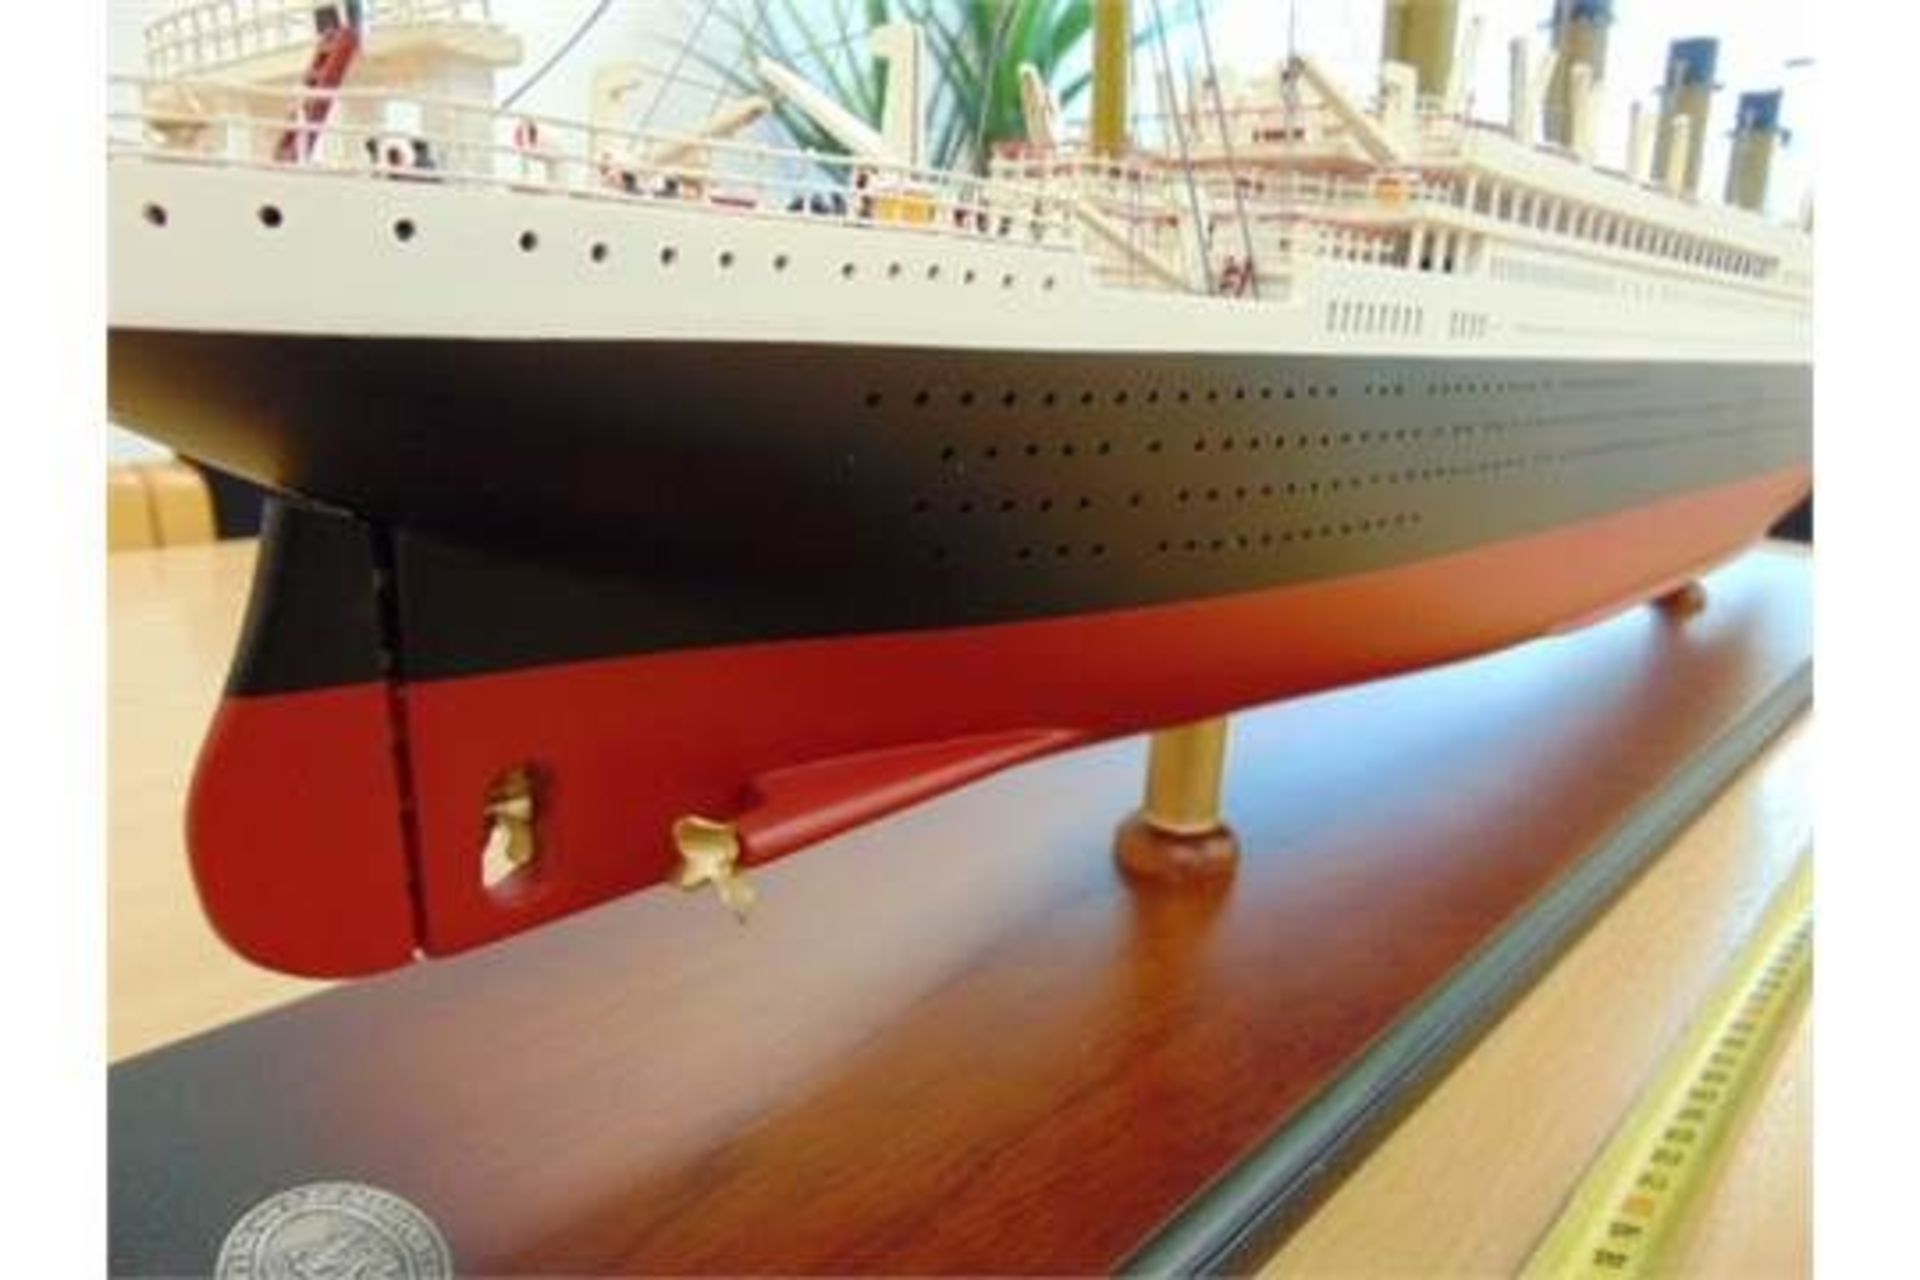 HIGHLY DETAILED MODEL OF RMS TITANIC - Image 10 of 11